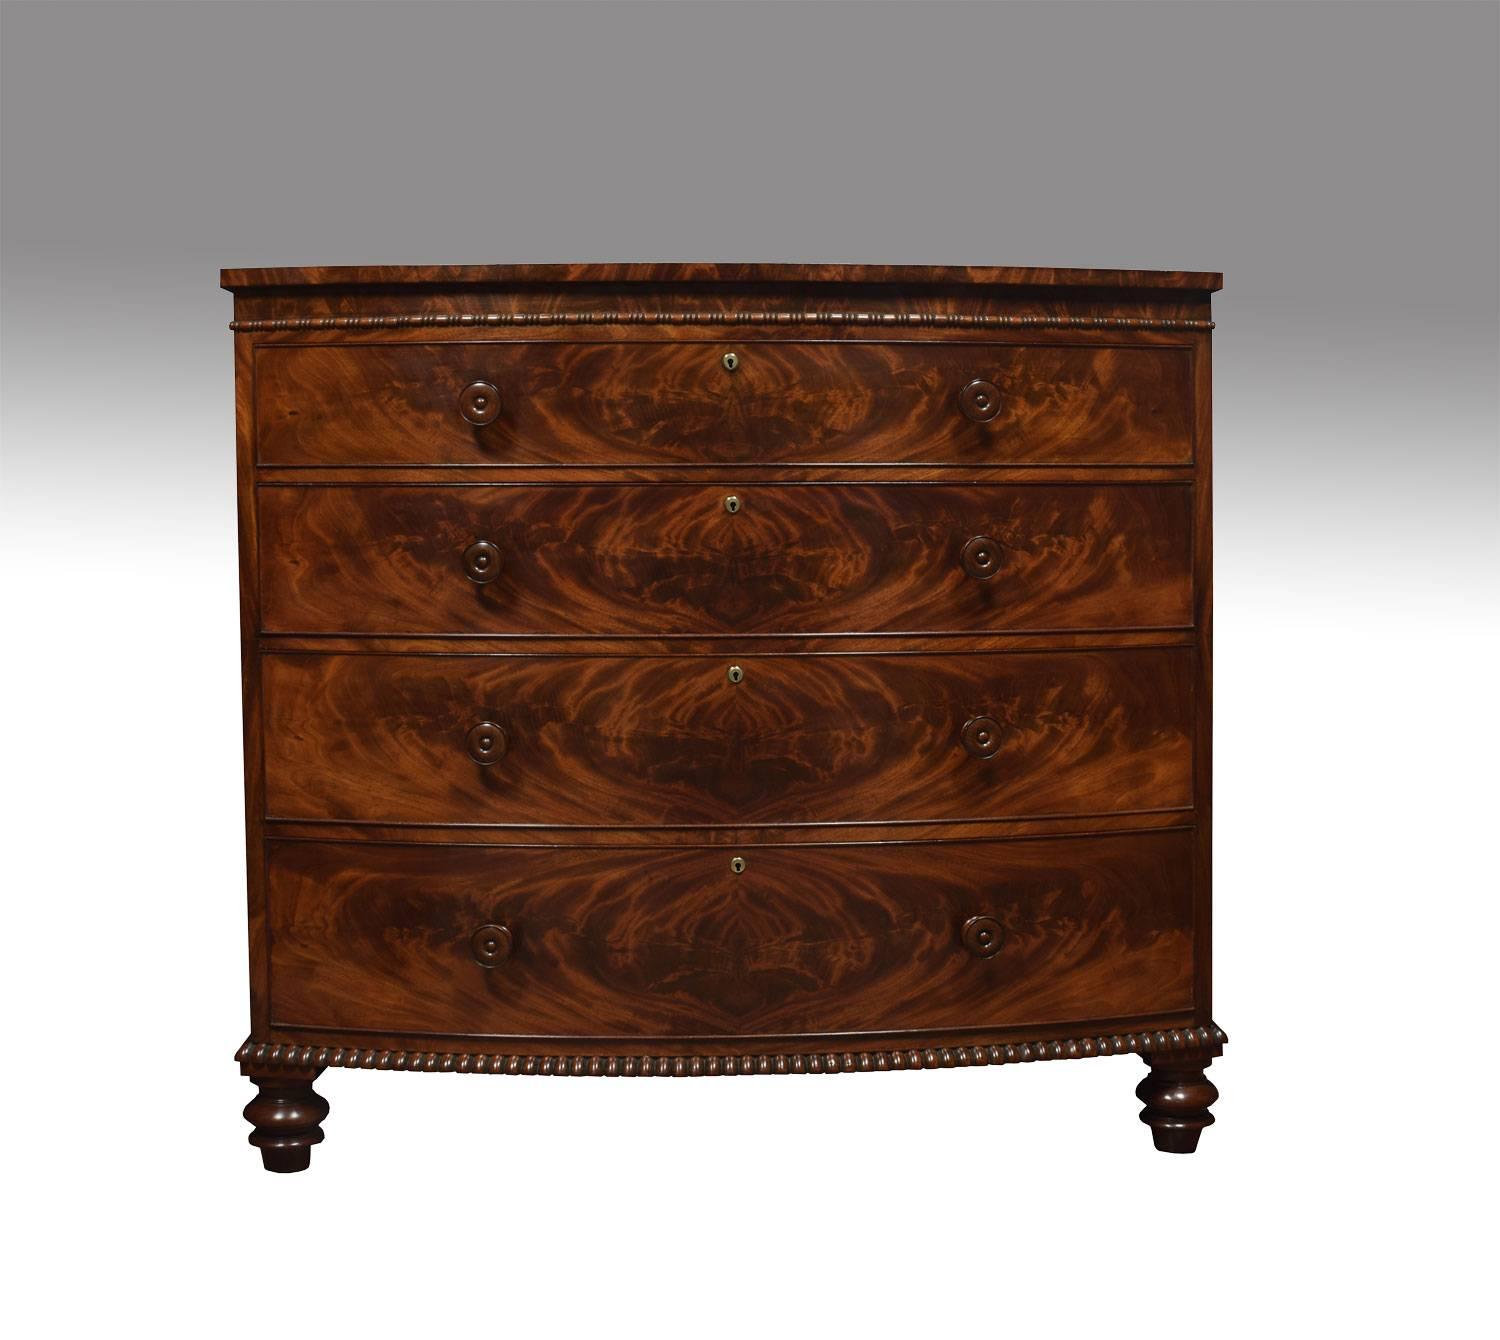 19th century mahogany chest of draws, the large bow fronted mahogany top above four well figured graduated draws, with turned handles and ash liners. Above gadroon moulding, all raised up on four turned feet. This chest of draws was probably made by